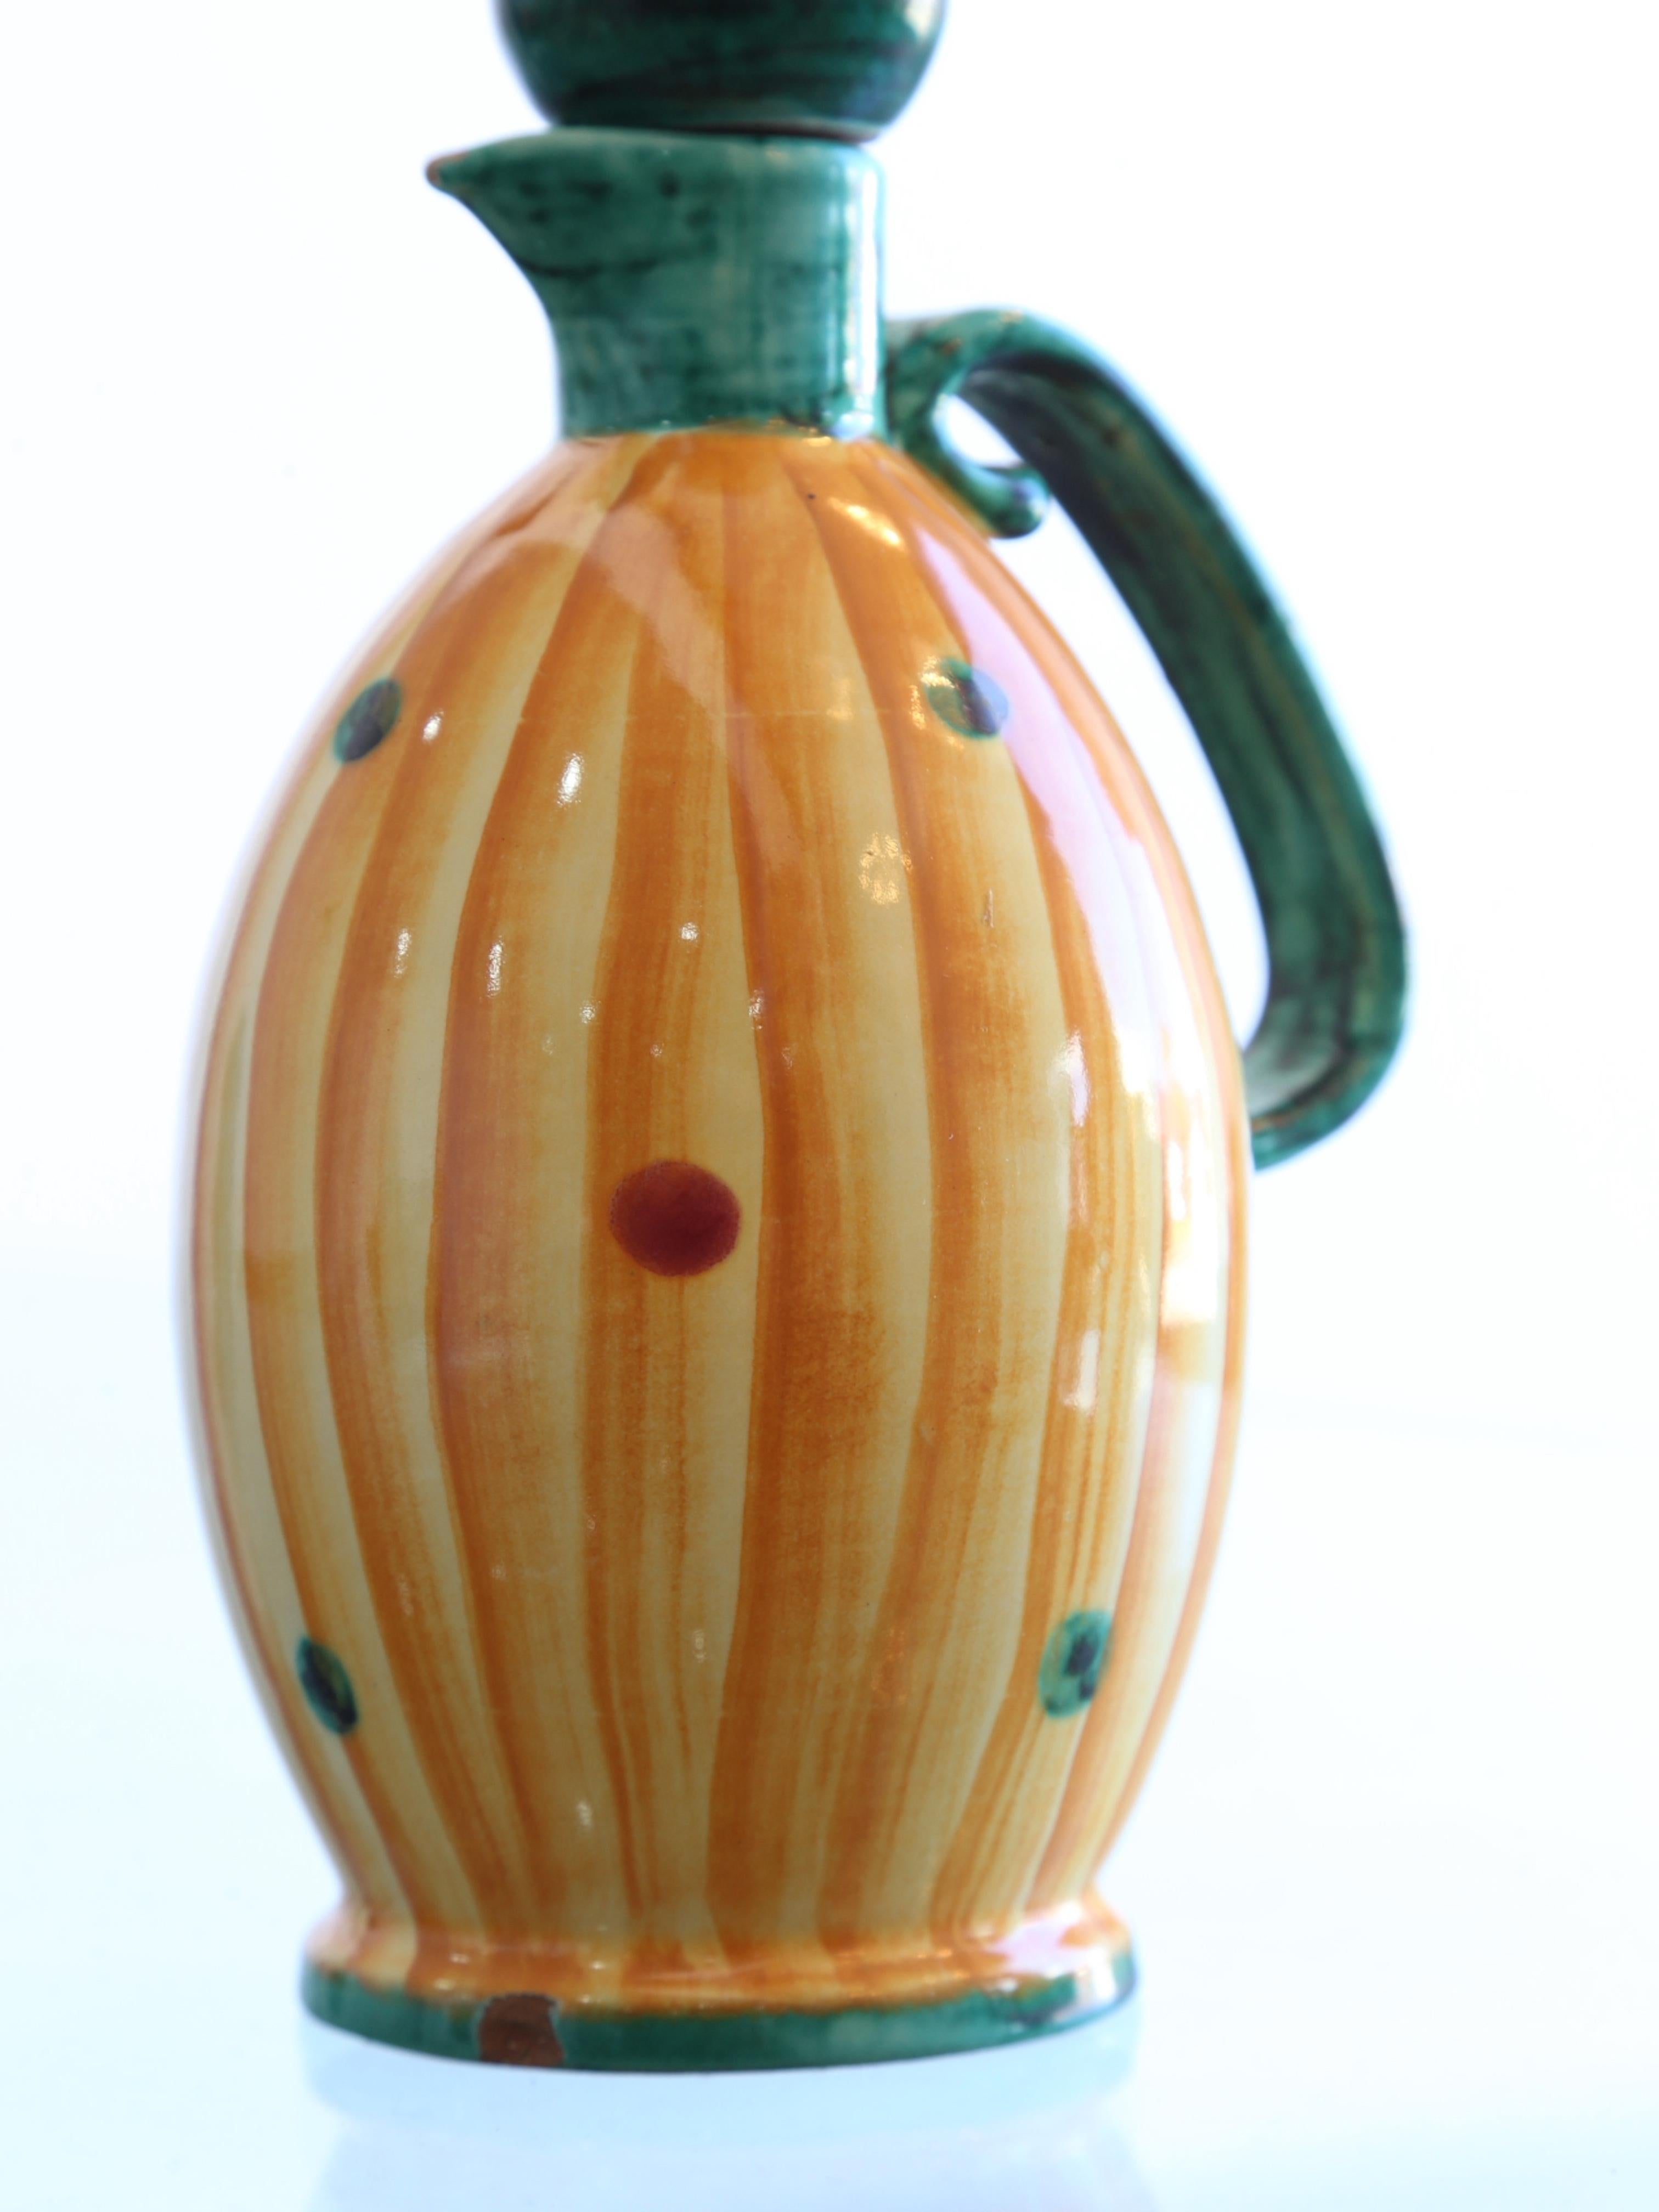 Italian Pucci Umbertide Hand Painted Olive Oil Ceramic Bottle, 1950s For Sale